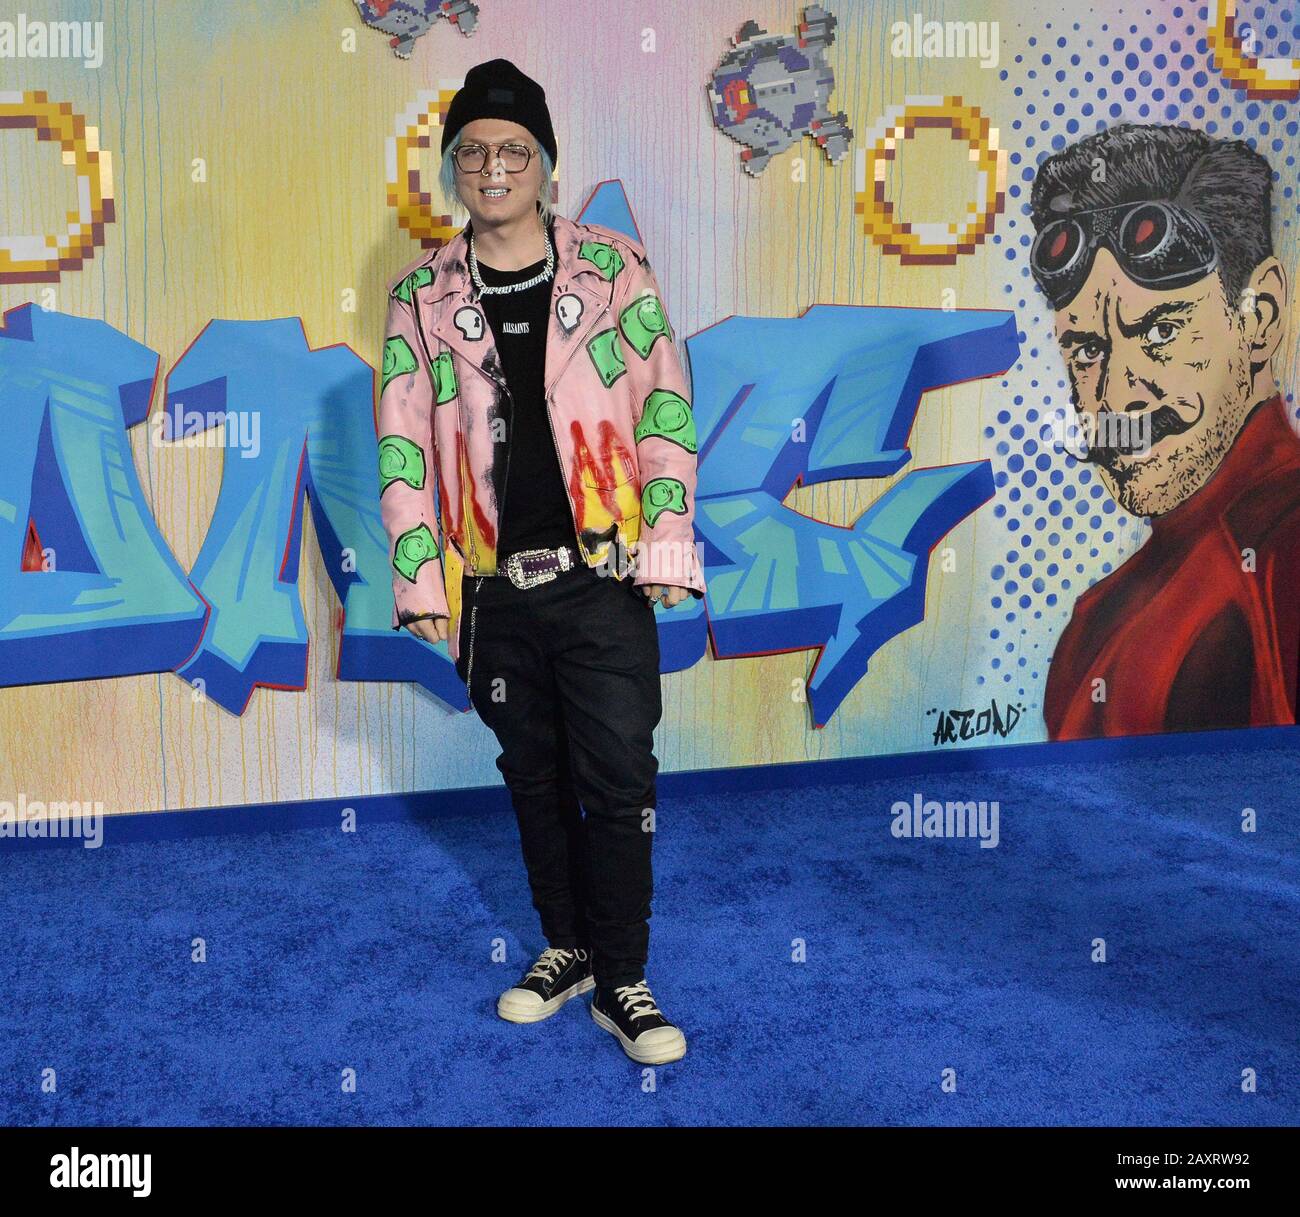 Los Angeles, California, USA. 12th Feb, 2020. US rapper Sueco the Chil) attends a special screening of the sci-fi family comedy adventure film 'Sonic the Hedgehog' at the Regency Village Theatre in the Westwood section of Los Angeles on Wednesday, February 12, 2020. Storyline: Based on the global blockbuster videogame franchise from Sega, 'Sonic' tells the story of the world's speediest hedgehog as he embraces his new home on Earth. Credit: UPI/Alamy Live News Stock Photo